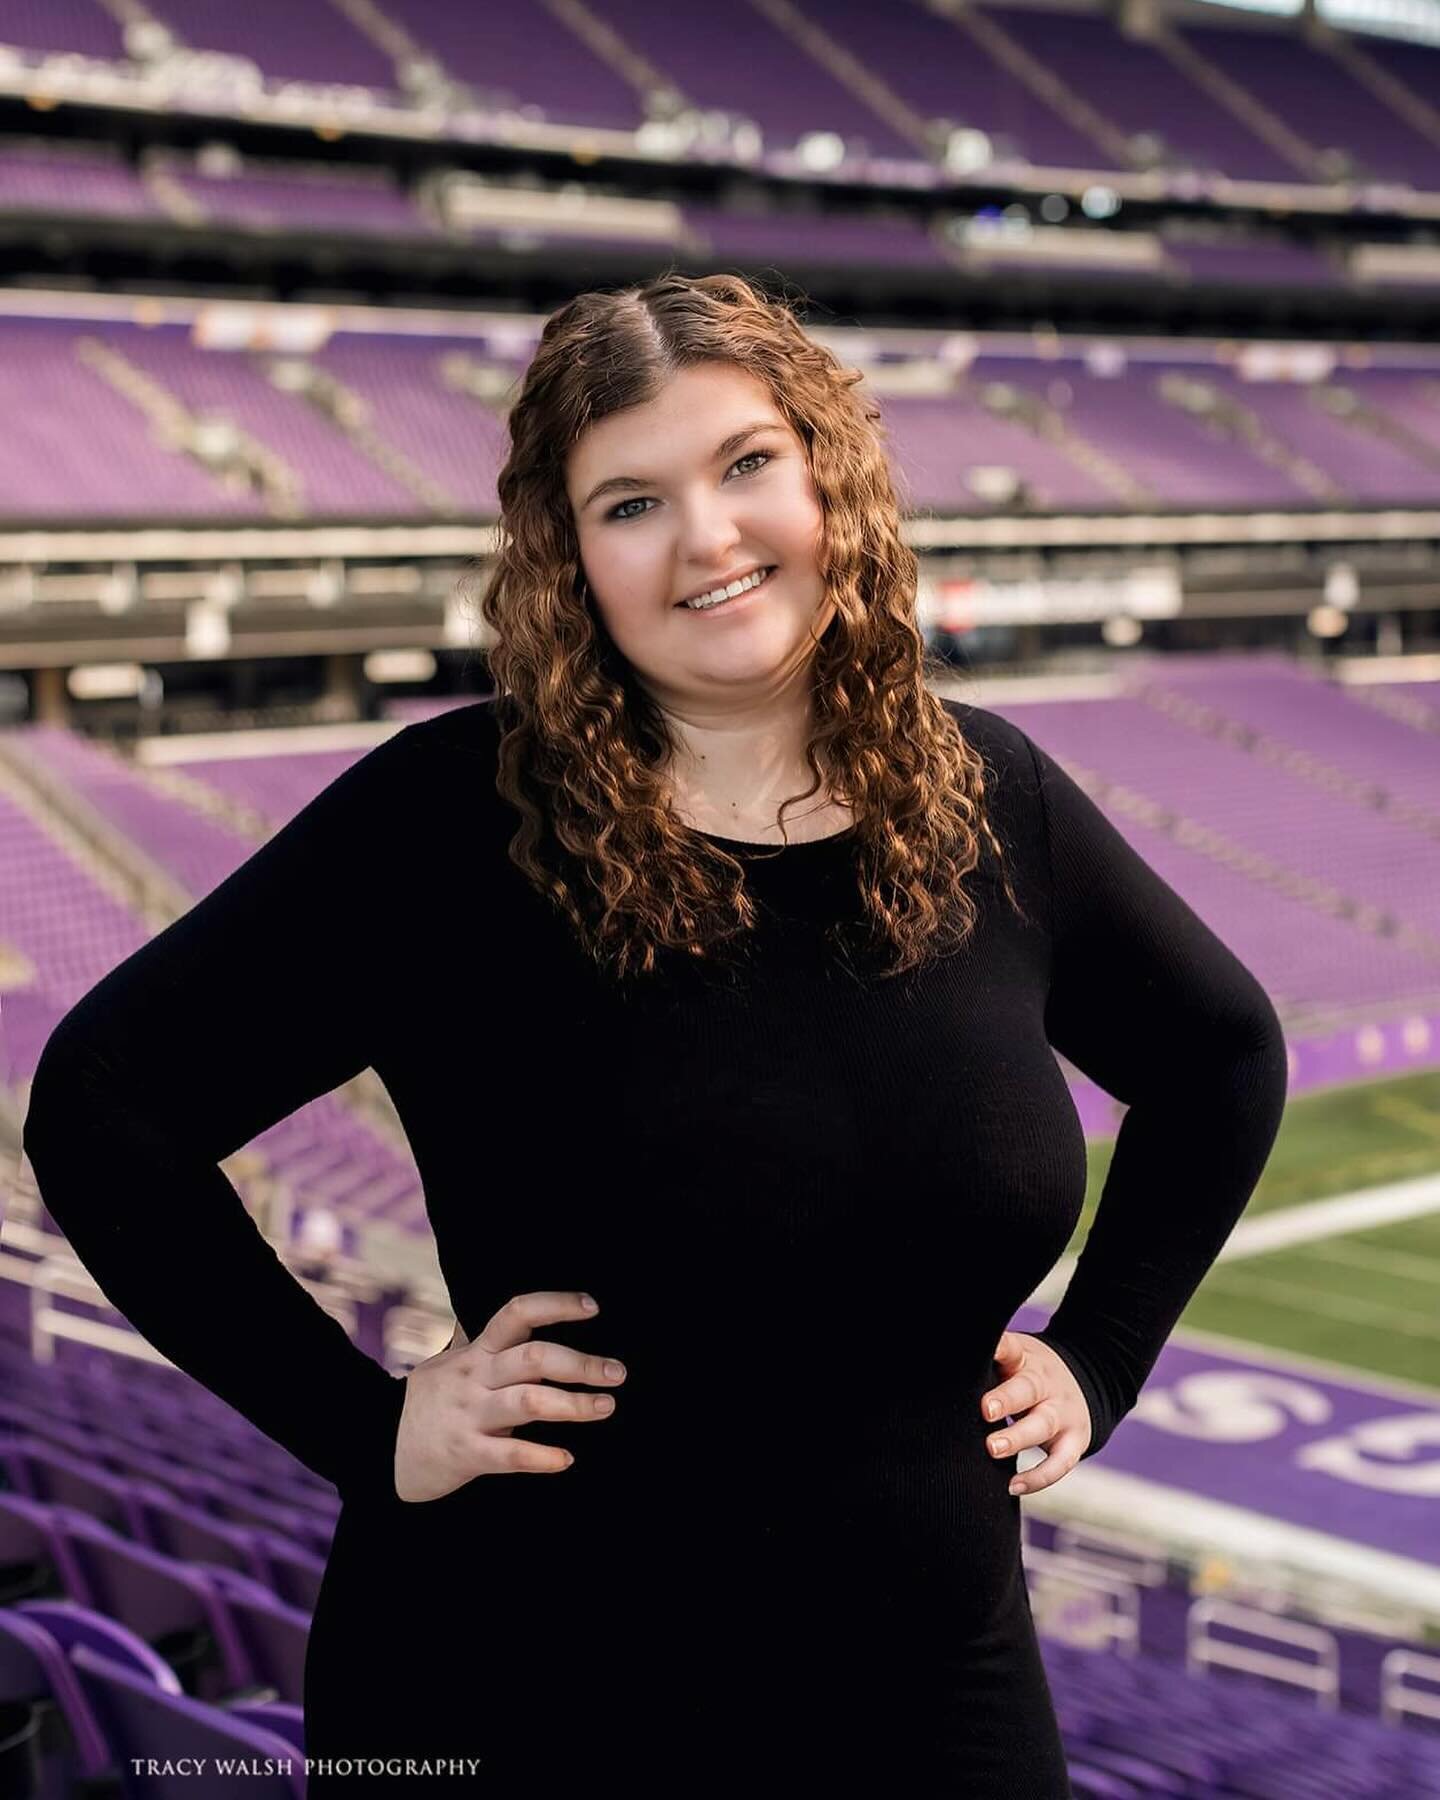 Senior photos at the stadium for this gorgeous young lady ! :)
Tracy Walsh Photography #seniorpictures #portraitphotography #tracywalshphoto #classof2024 #mplsphotographer